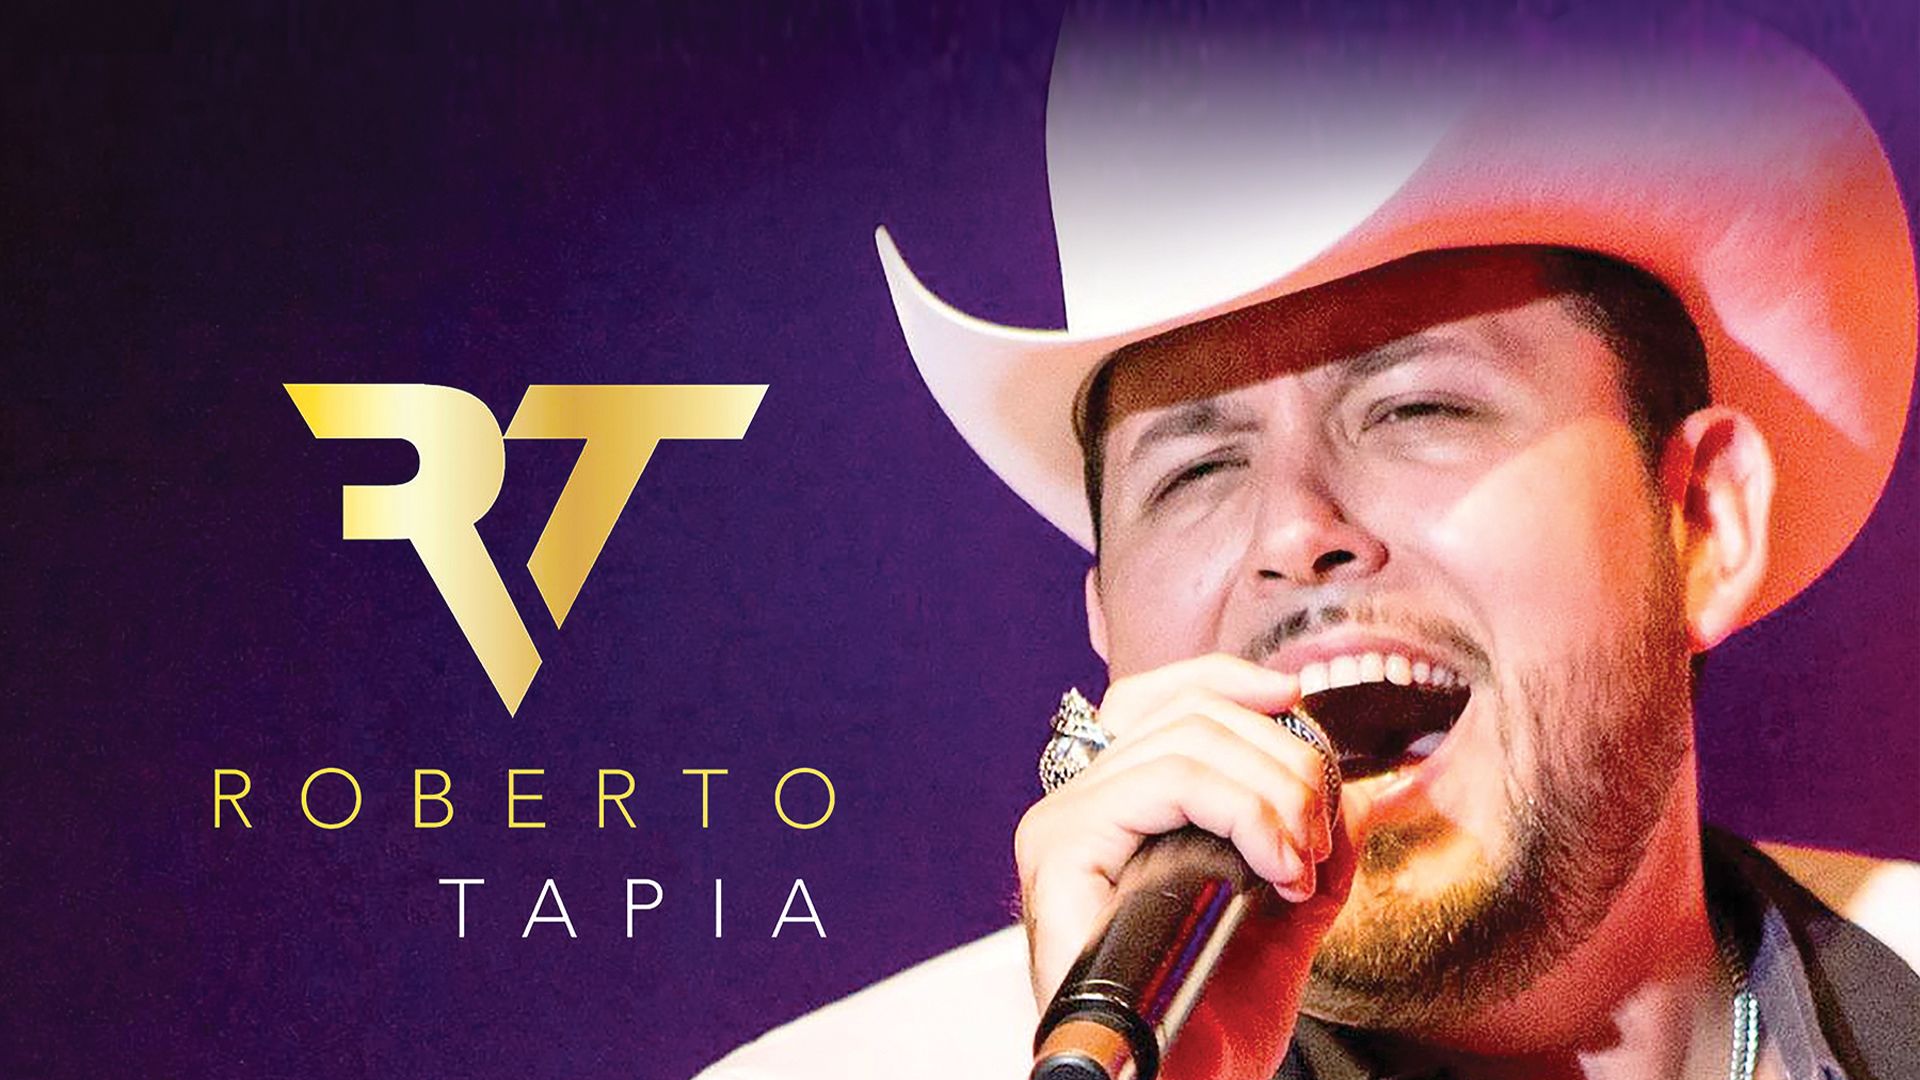 Roberto Tapia Wearing A Hat Talking On A Cell Phone